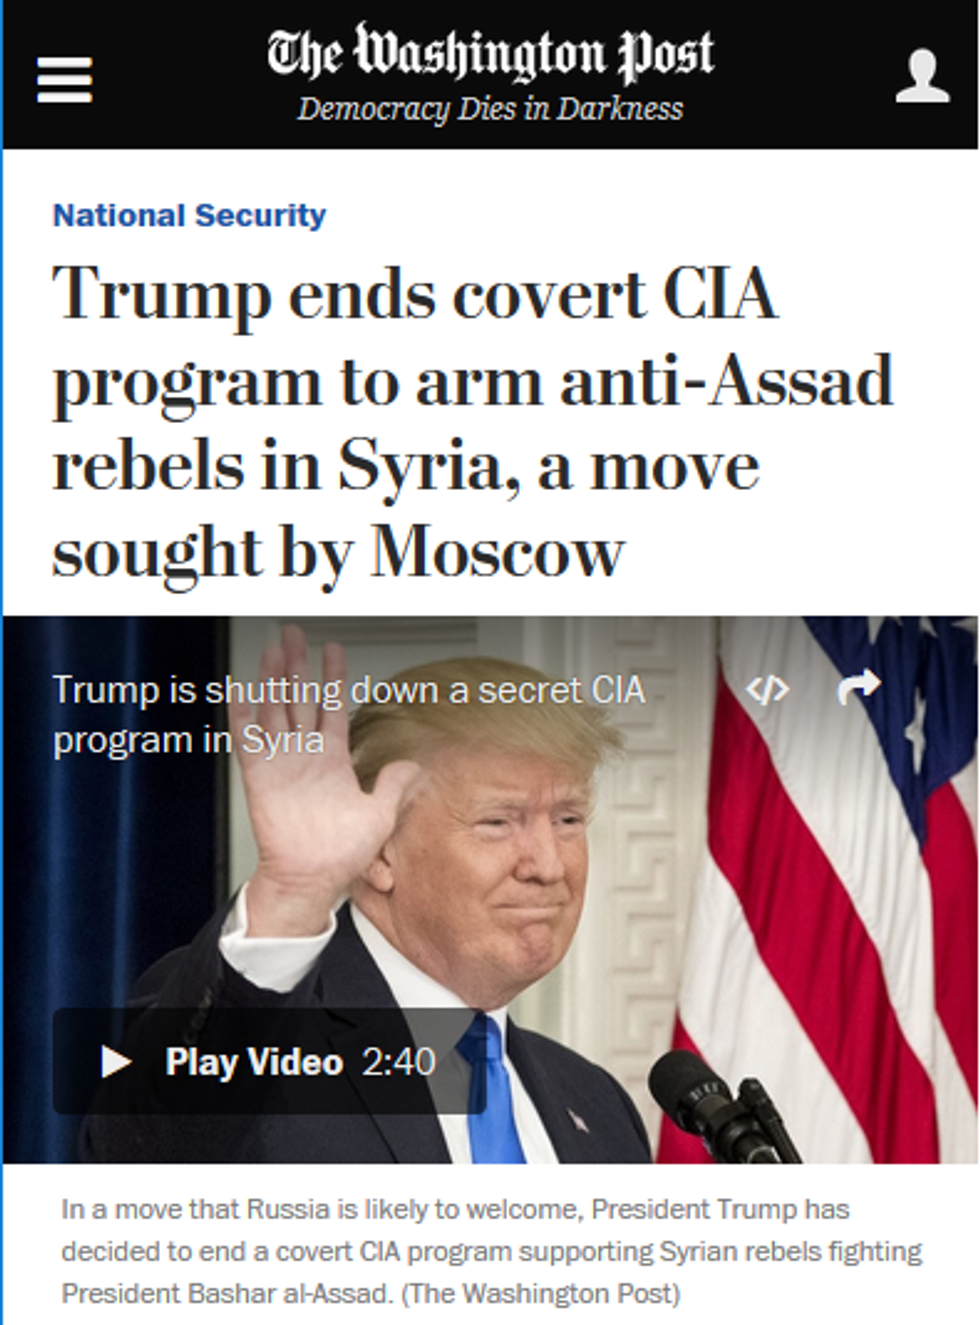 Washington Post: Trump ends covert CIA program to arm anti-Assad rebels in Syria, a move sought by Moscow